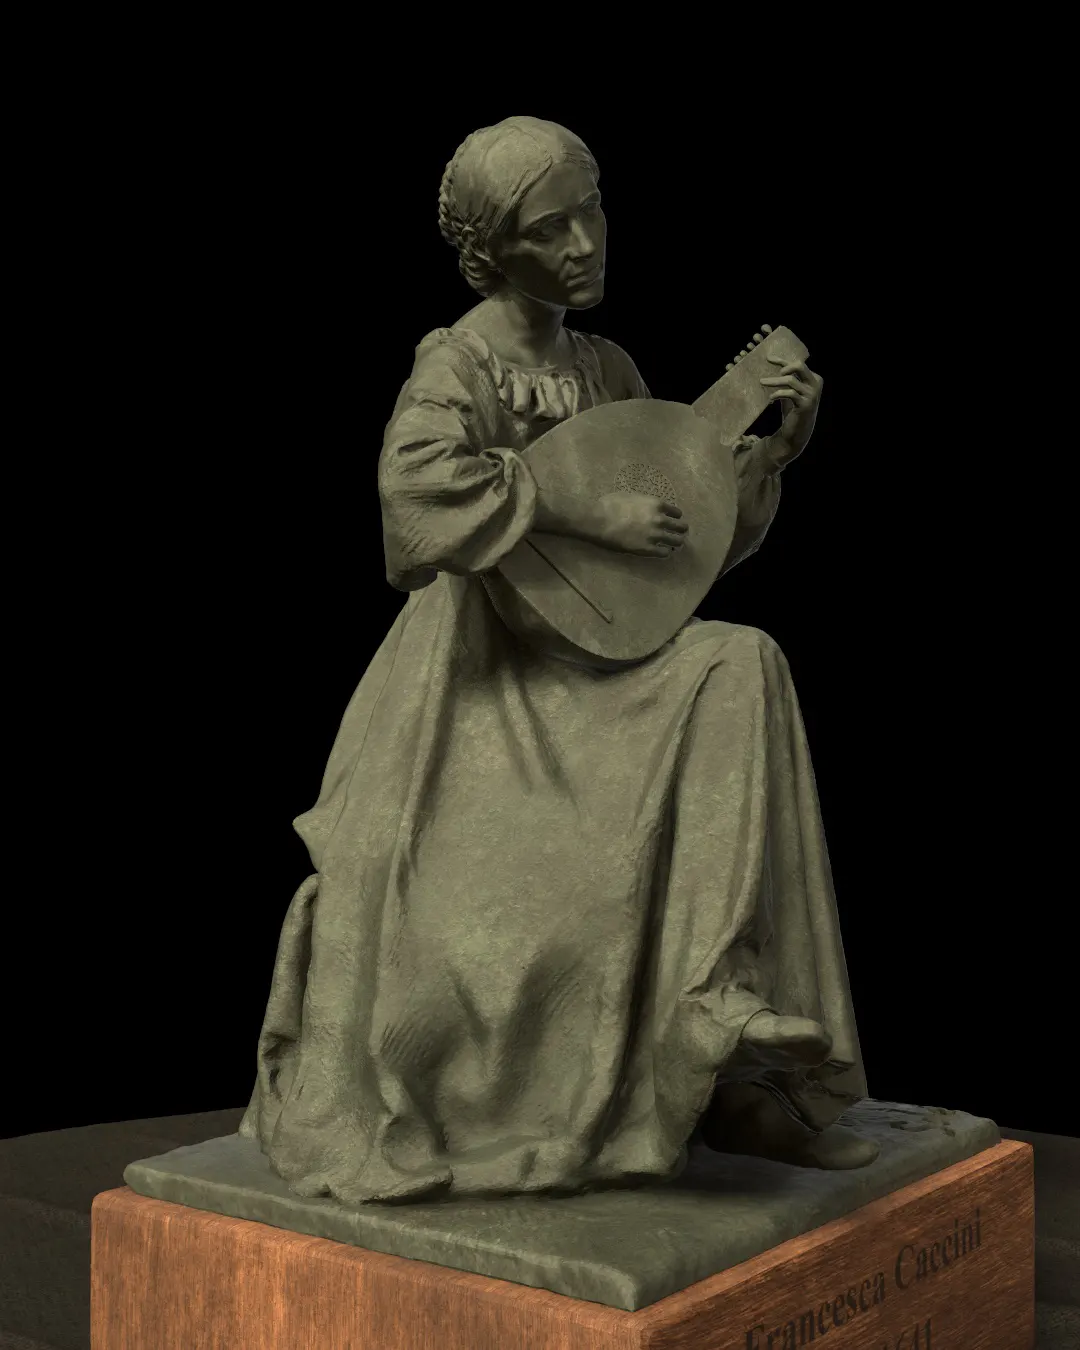 Francesca-Caccini-statue/Rendering-of-Francesca-Caccini-statue-modeled-by-Emil-Sole-9.webp